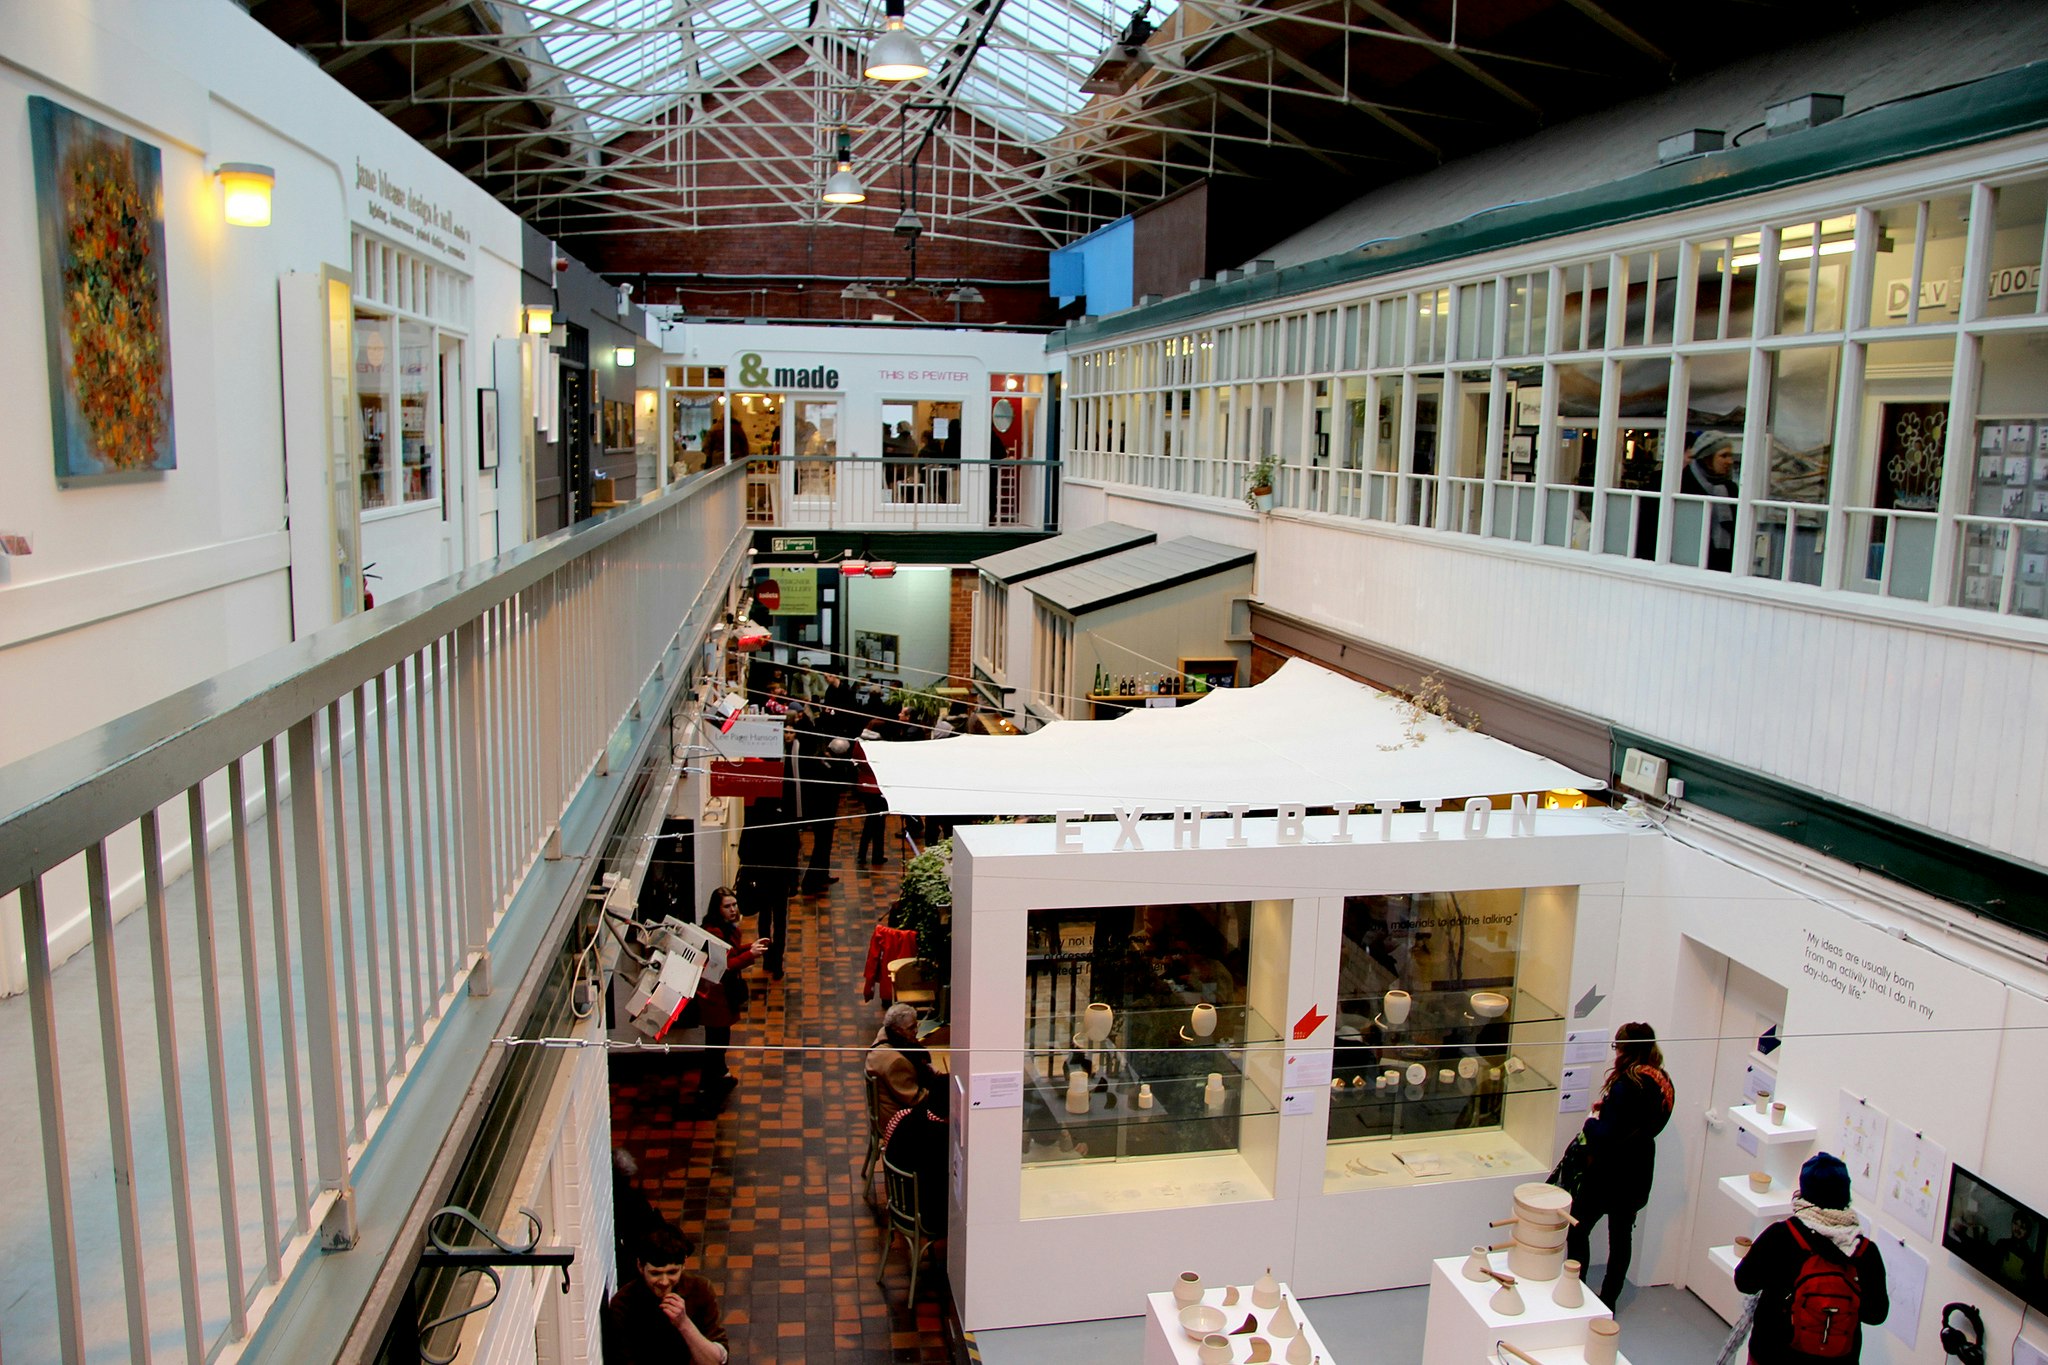 Pop Up Spaces in Manchester - Manchester Craft and Design Centre - Events in Central Atrium - Banner